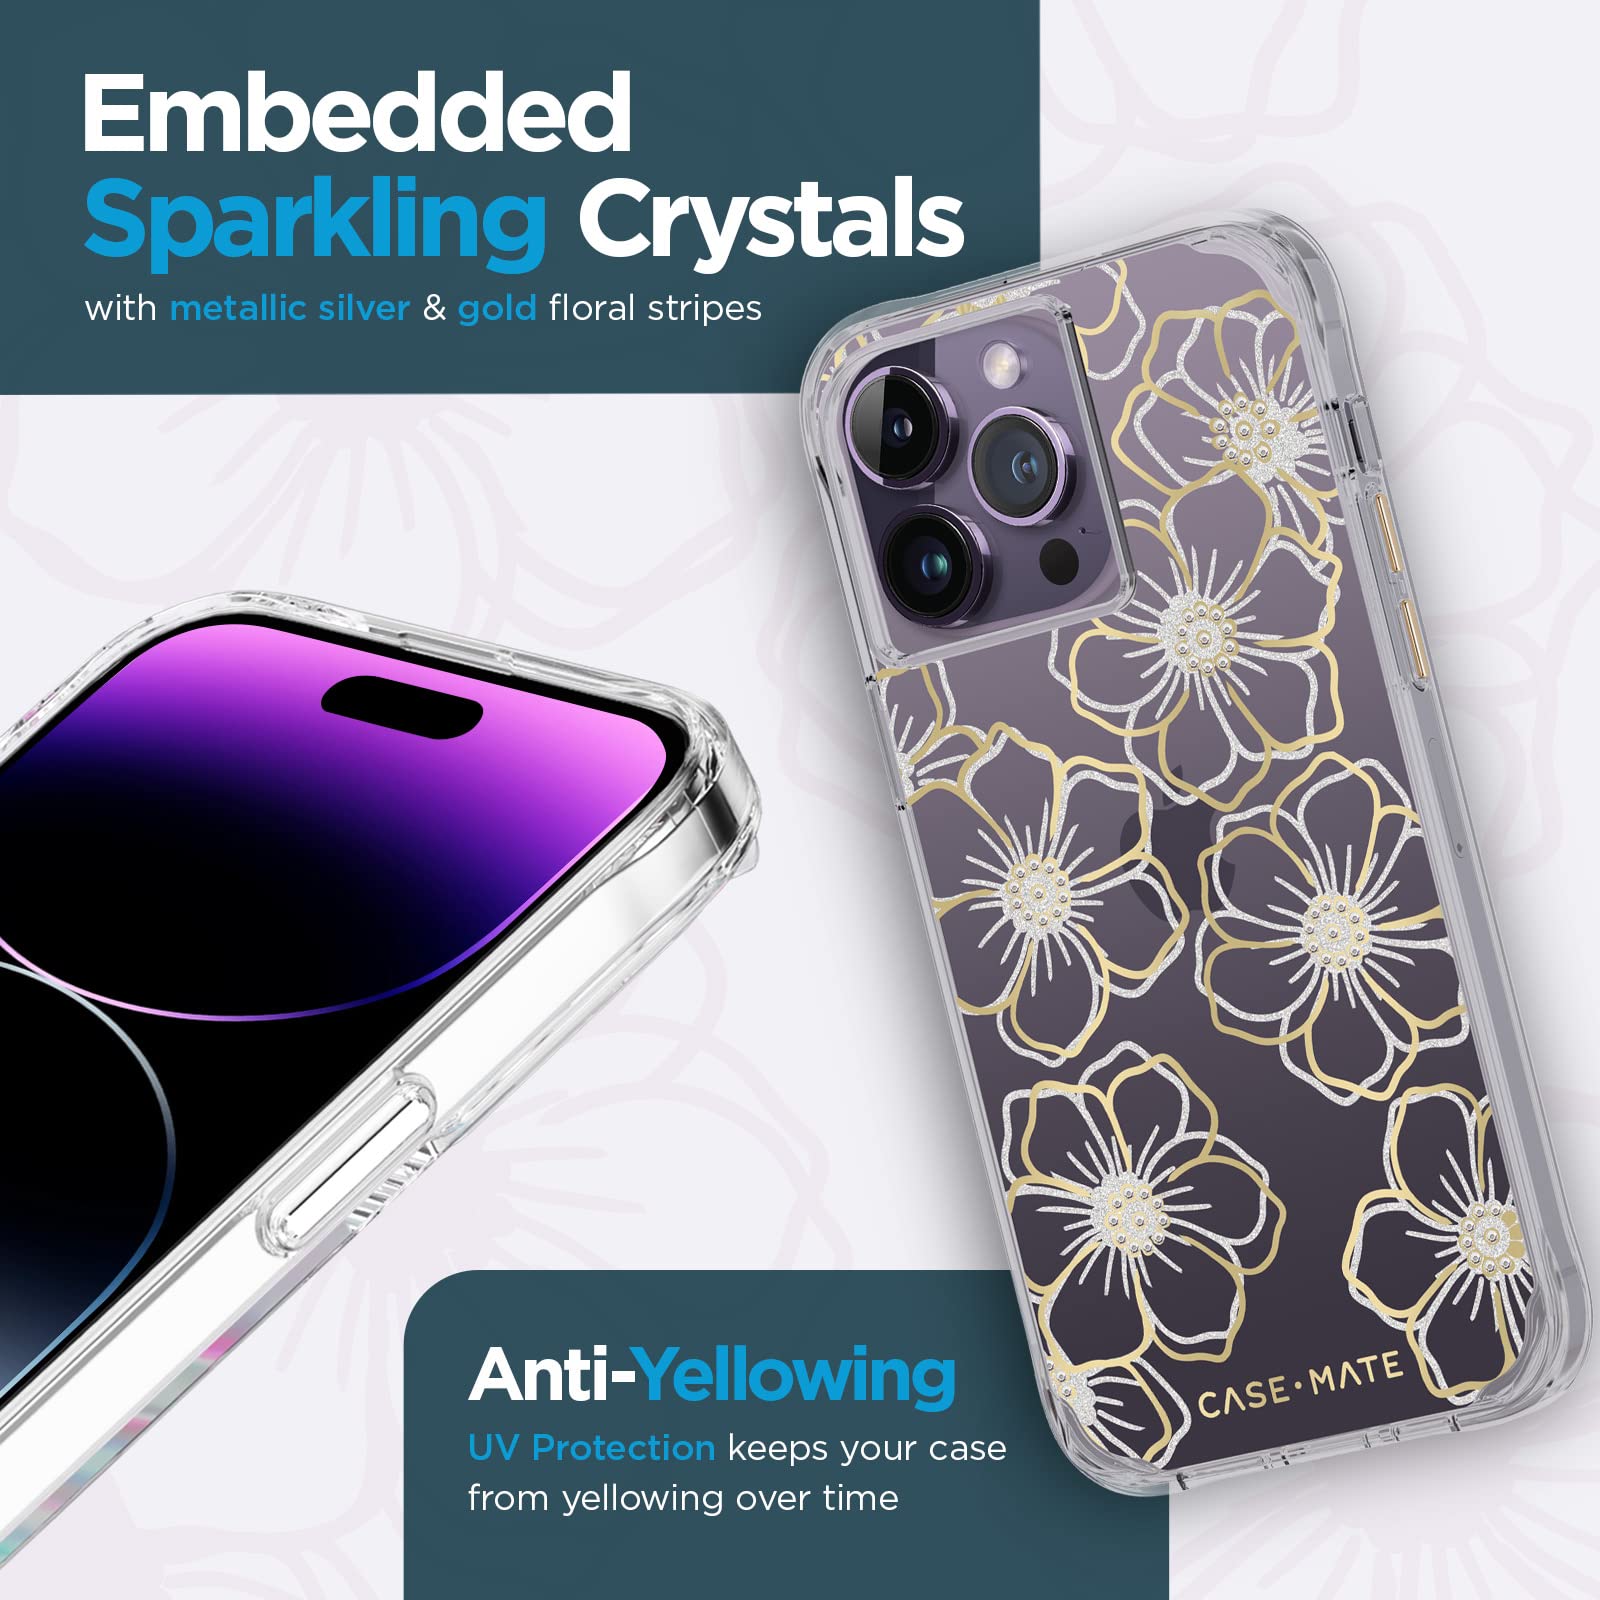 Case-Mate iPhone 14 Pro Max Case - Floral Gems - With 10ft Drop Protection & Wireless Charging - Sparkly Rhinestones Case for iPhone 14 Pro Max - Lightweight, Anti Scratch, Shock Absorbing Materials